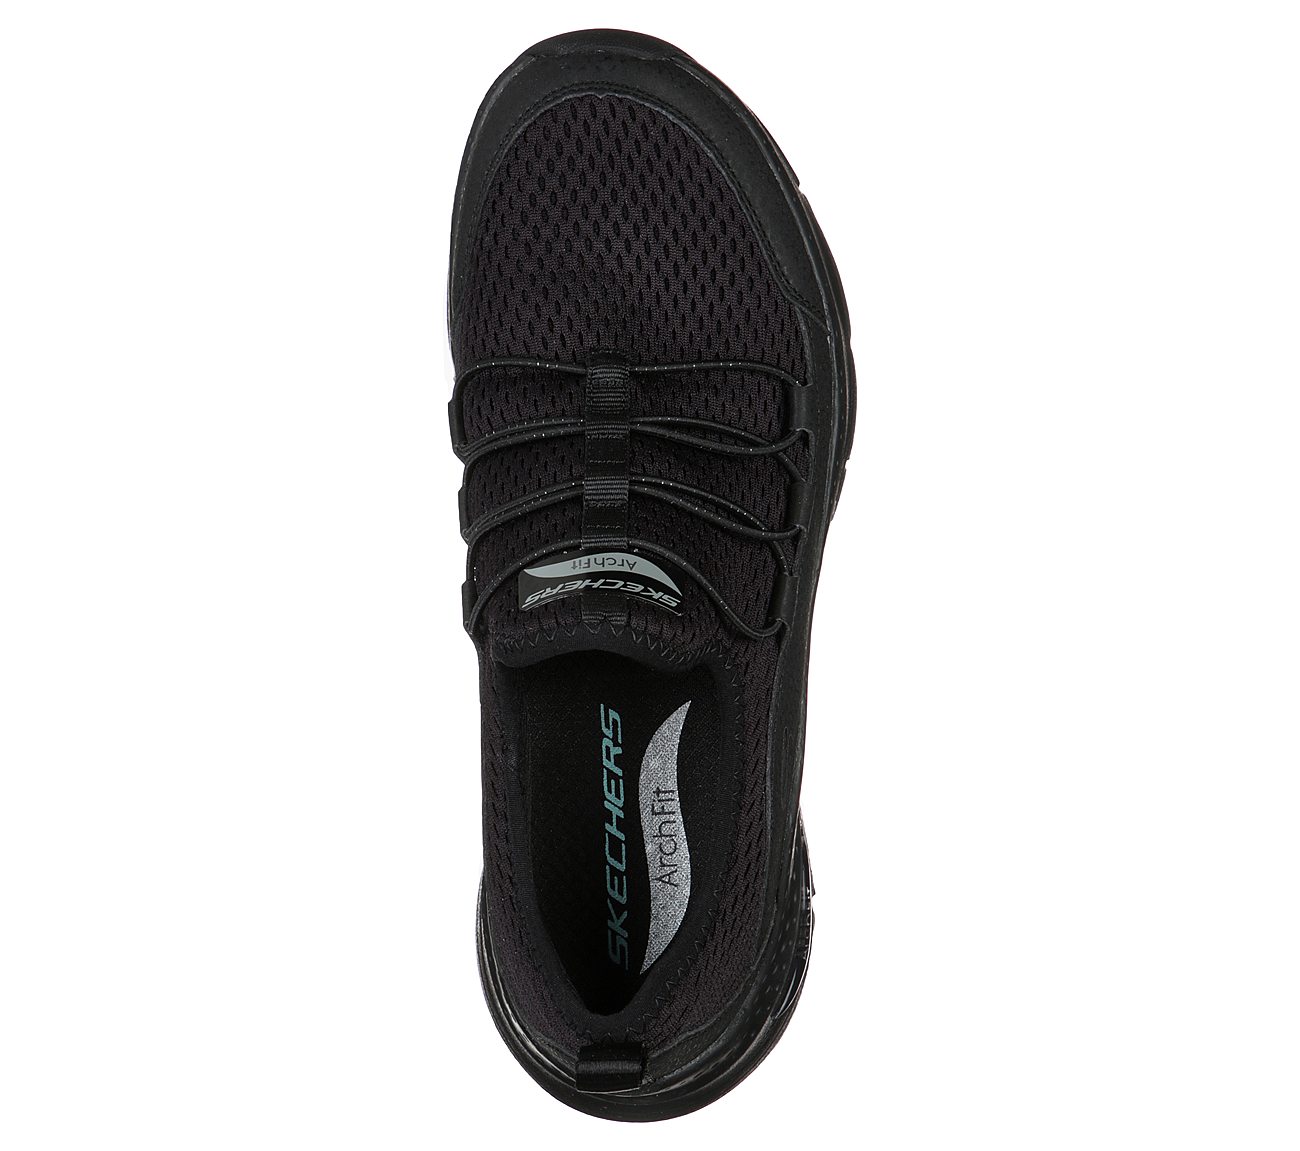 ARCH FIT - LUCKY THOUGHTS, BBLACK Footwear Top View